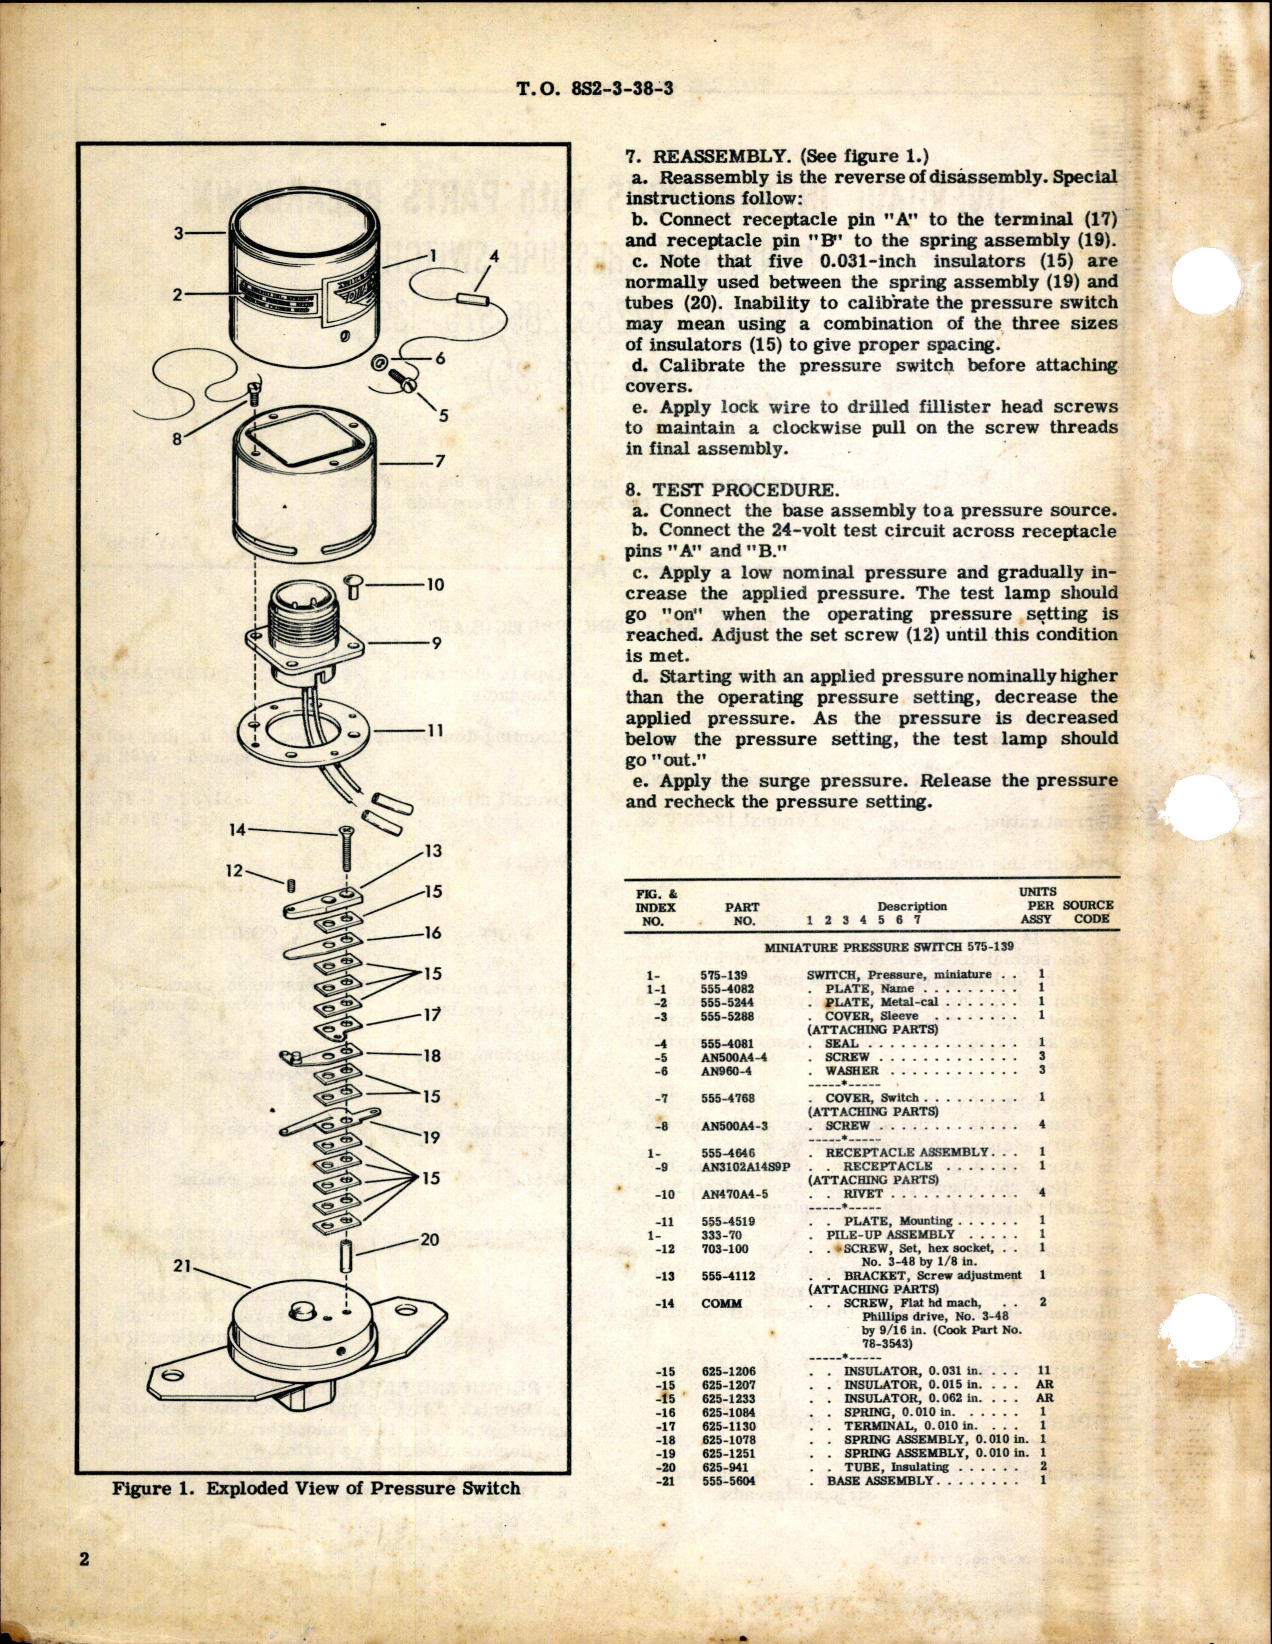 Sample page 2 from AirCorps Library document: Miniature Pressure Switch SN 3360 072837285-545